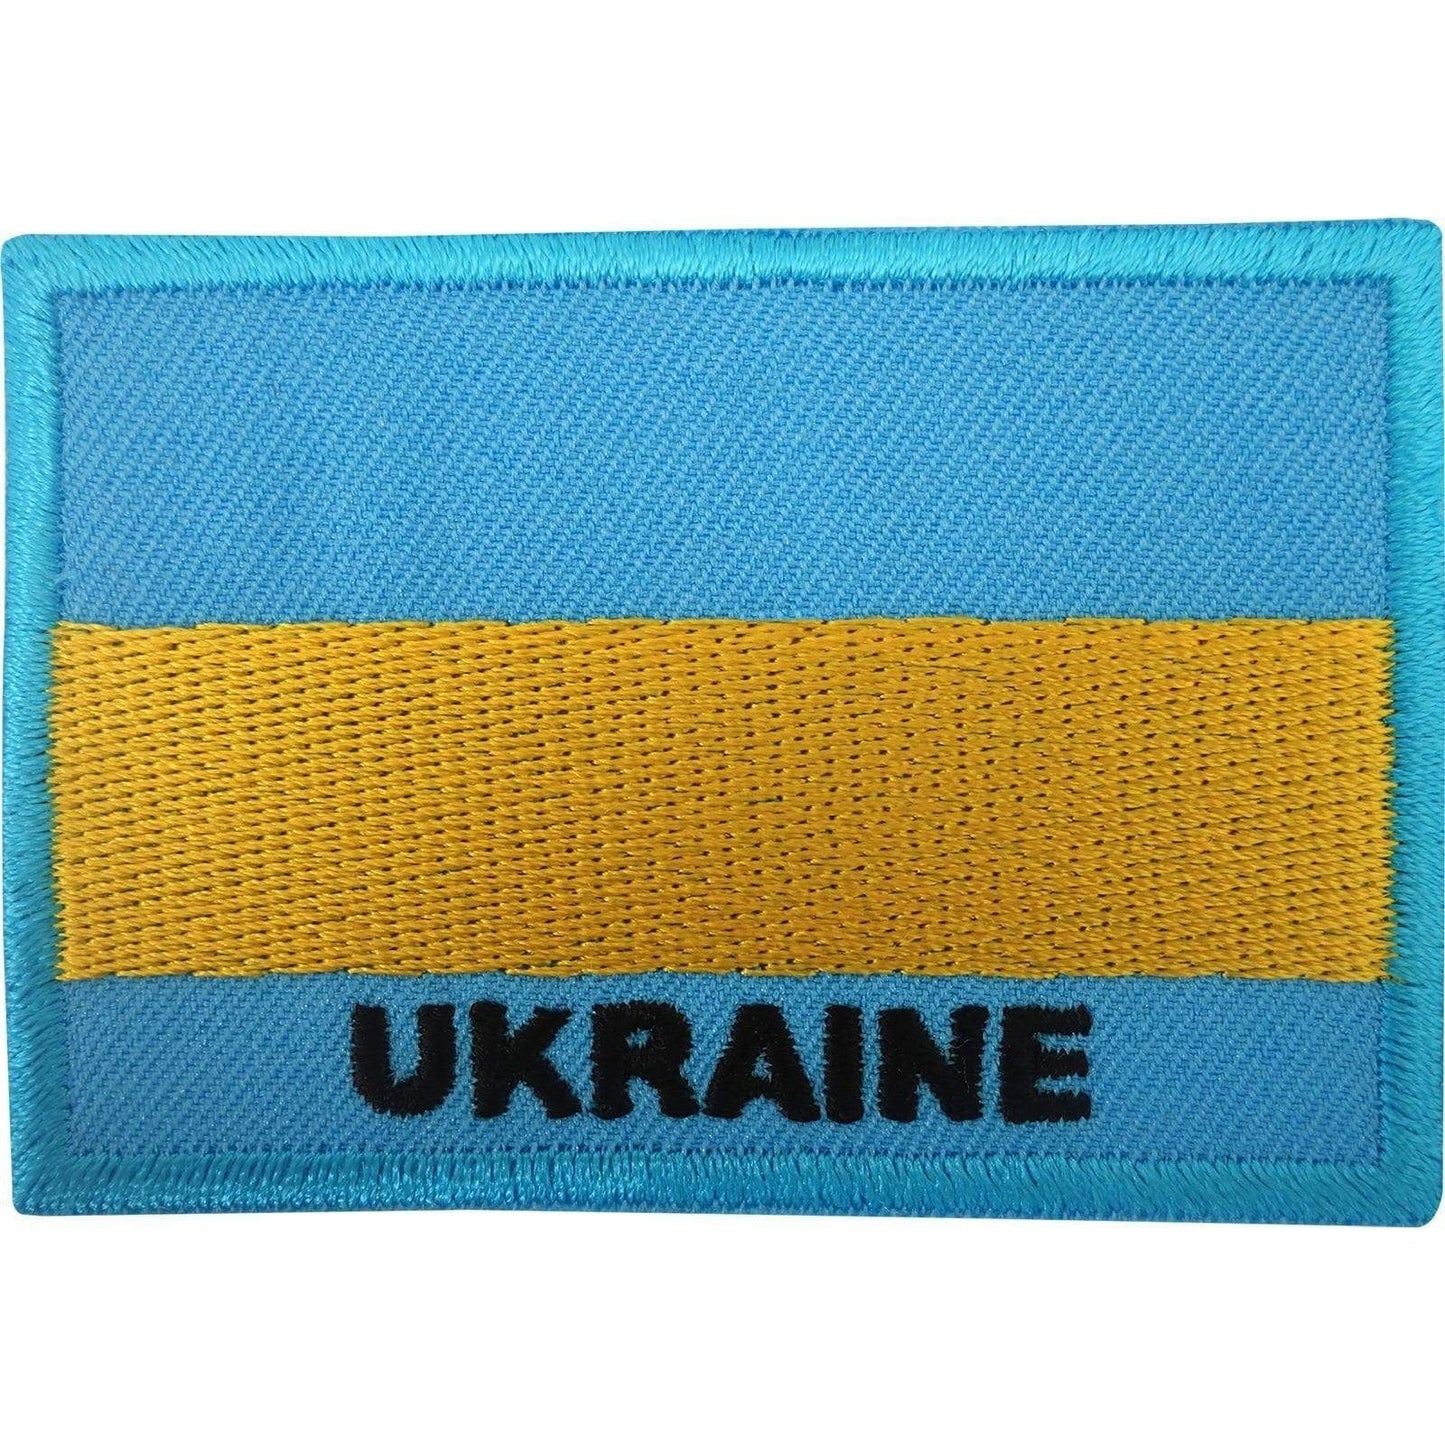 Ukraine Flag Patch Iron On / Sew On Badge Ukrainian Embroidered Embroidery Motif